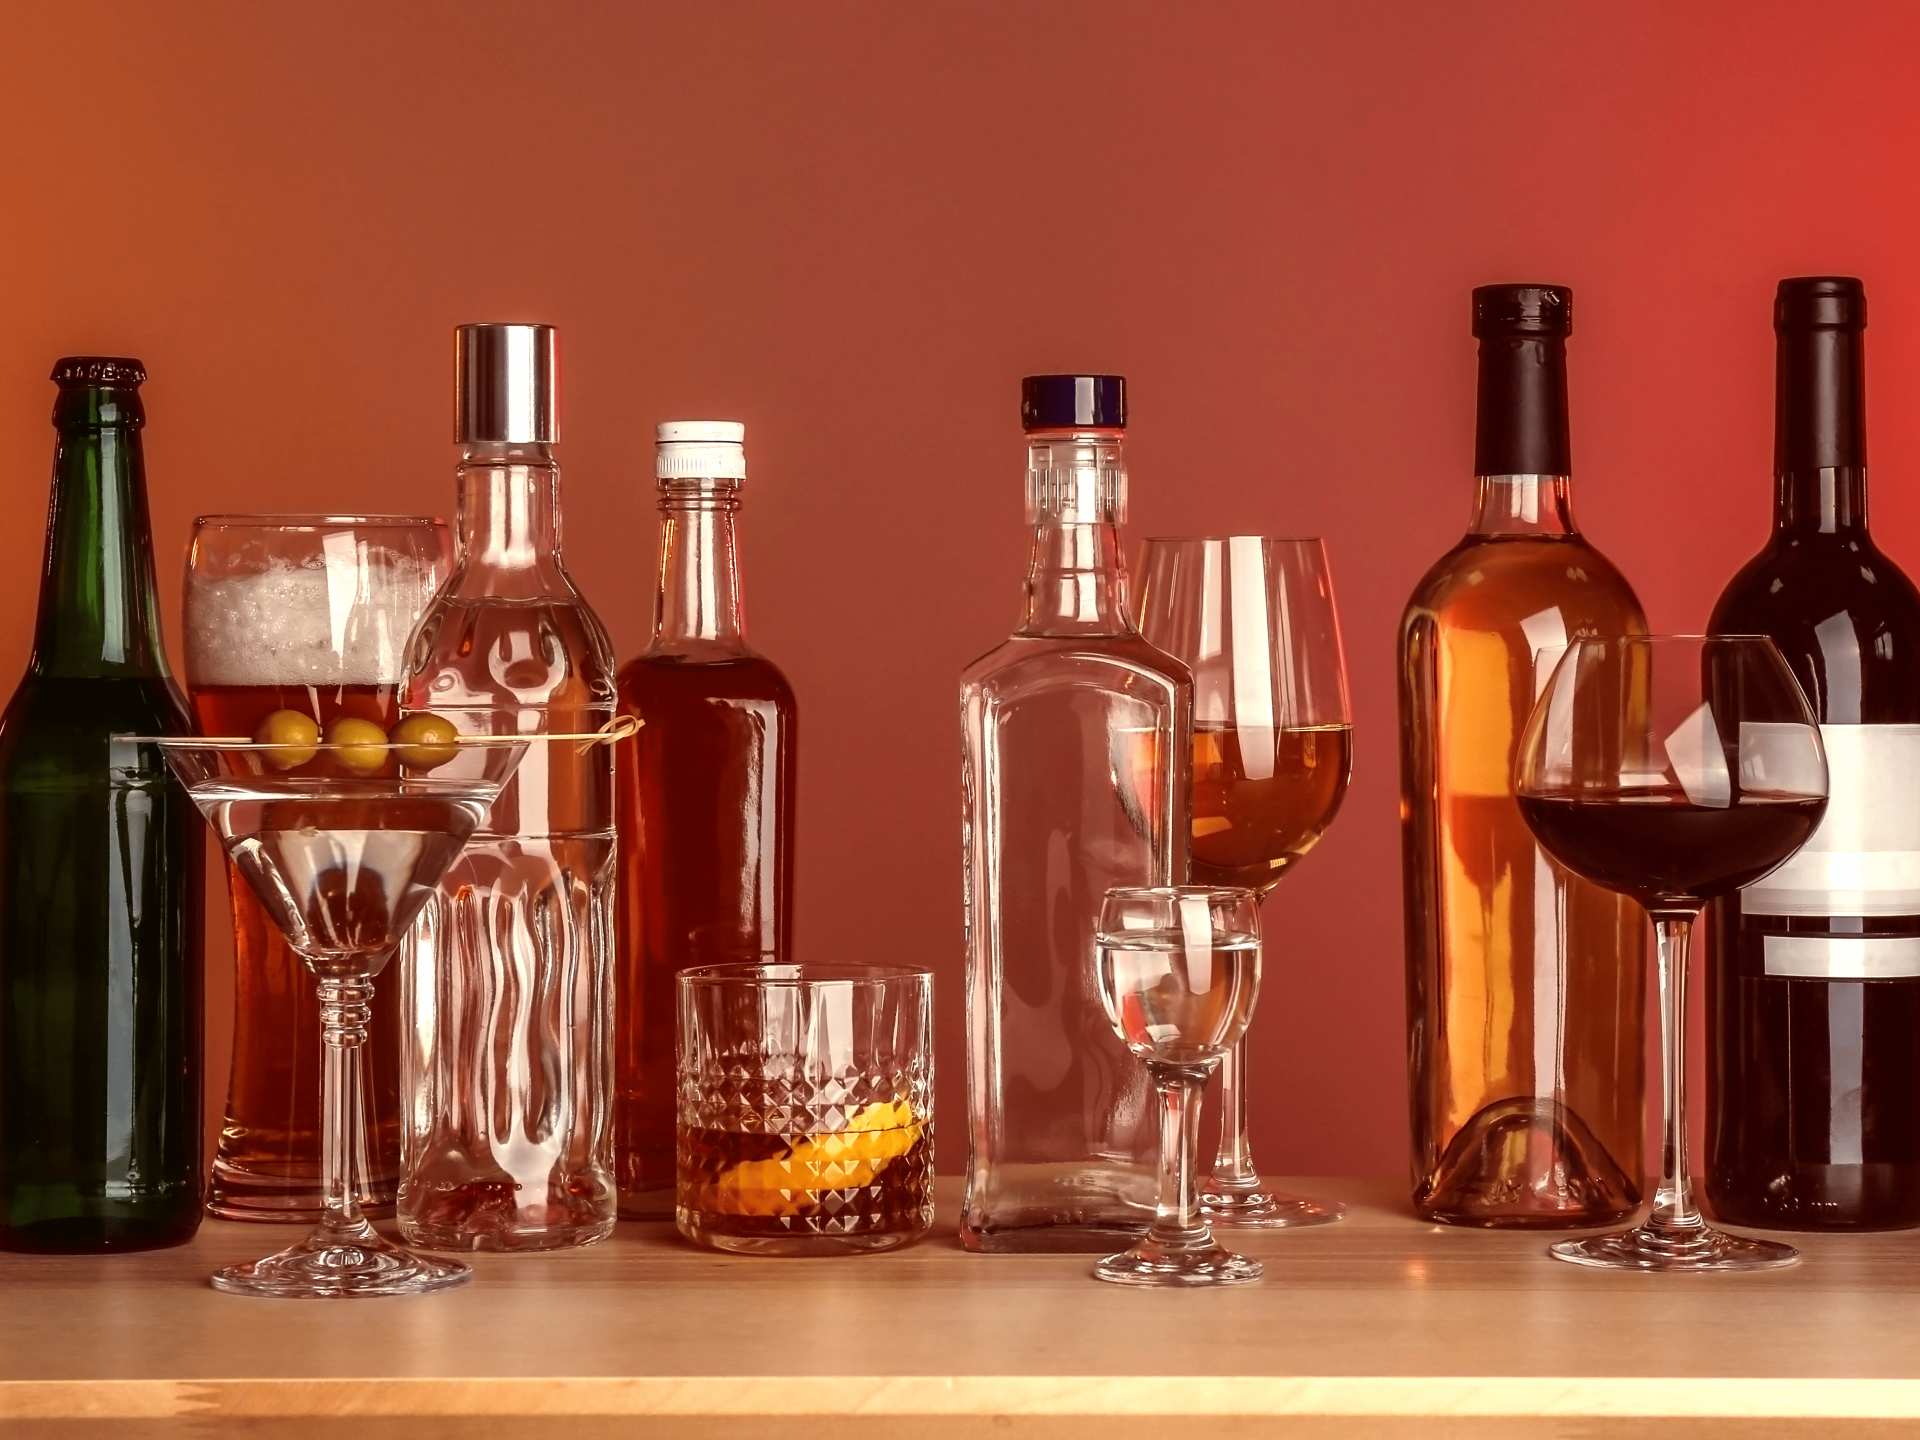 Holiday bottles to gift | A lineup of bottles and glasses